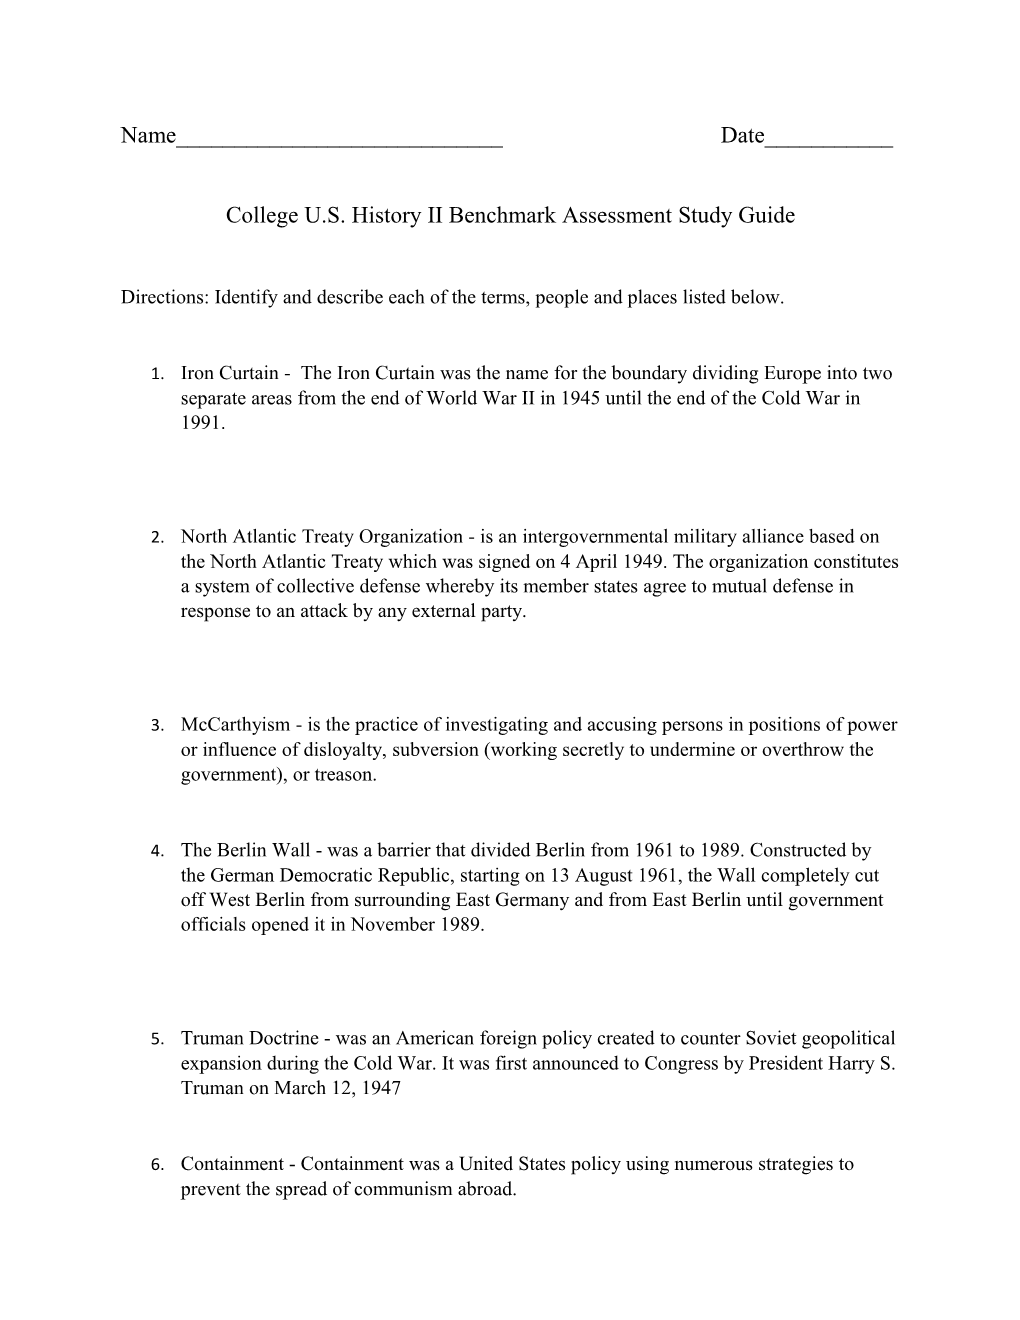 College U.S. History II Benchmark Assessment Study Guide